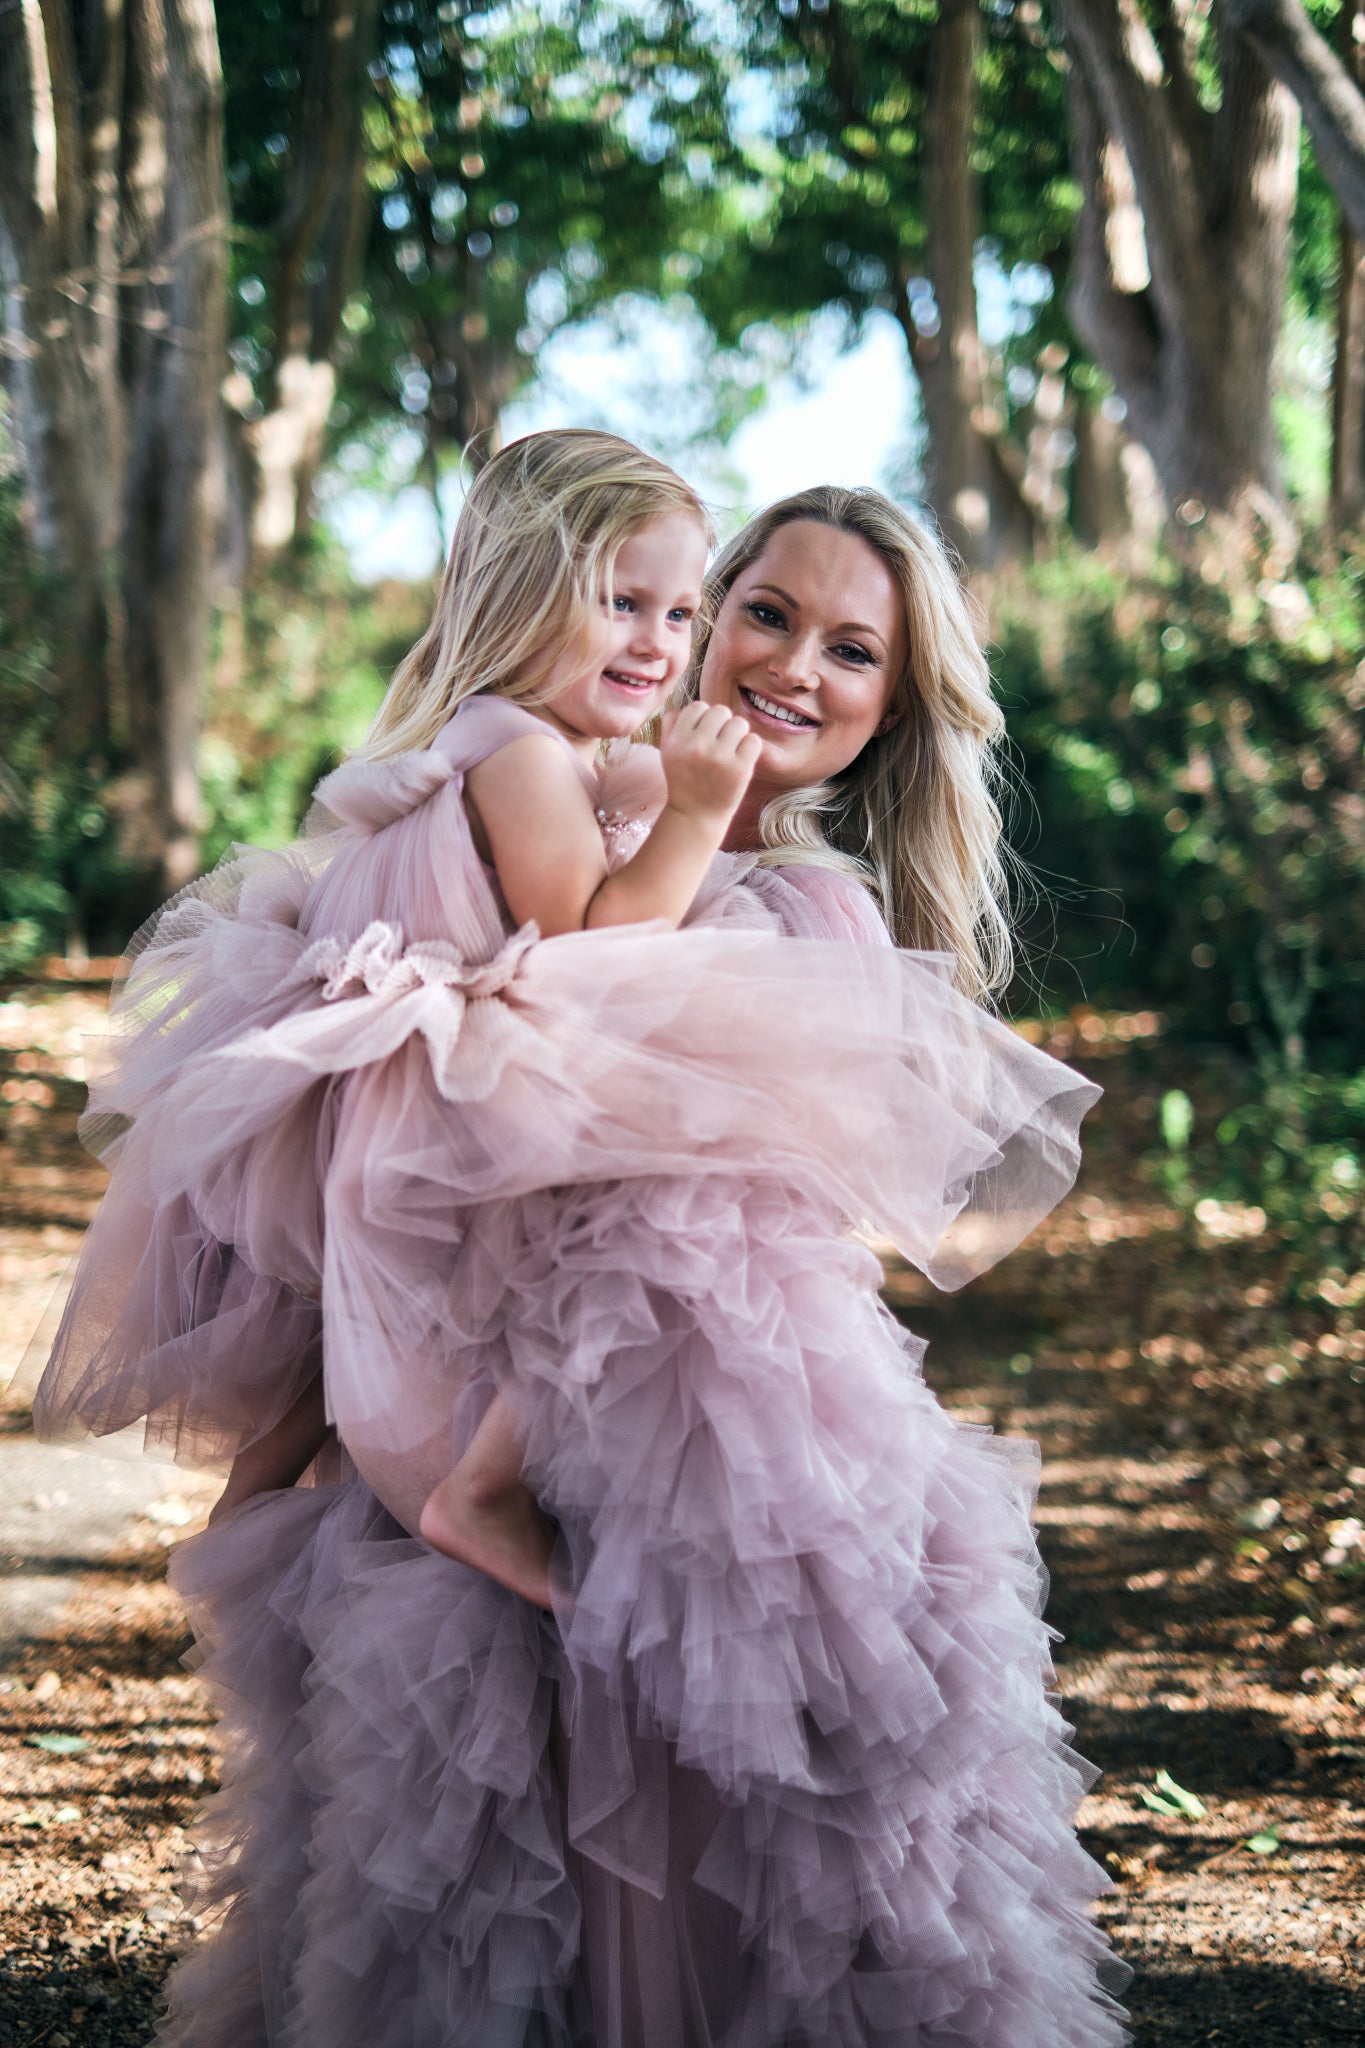 Bentley and Lace: Custom Couture for Kids and Adults